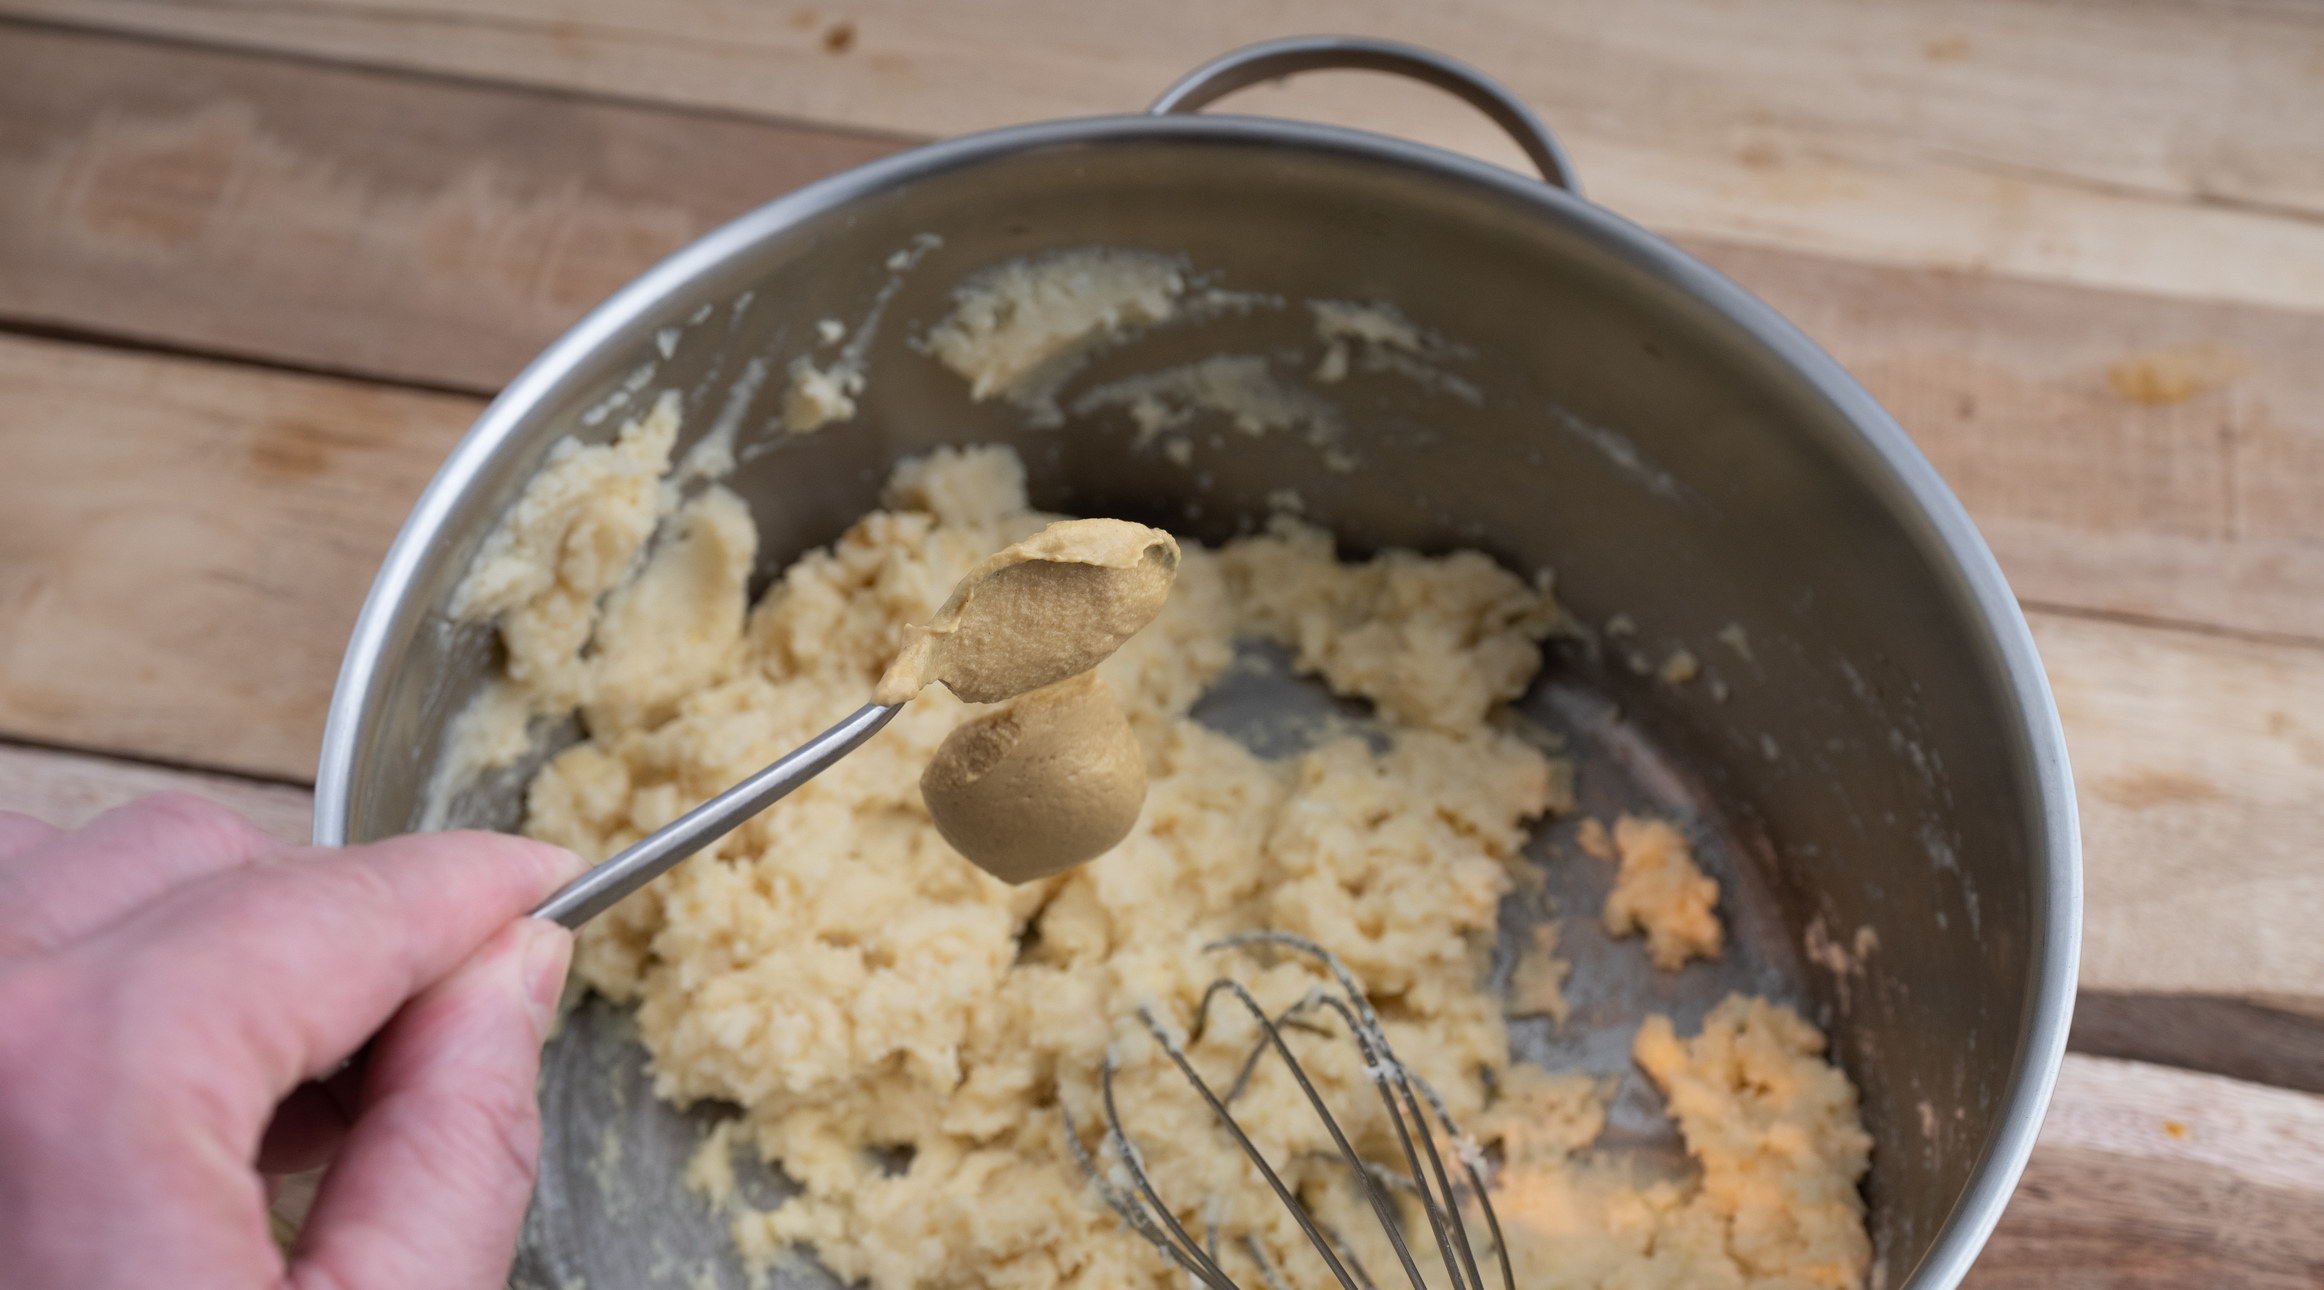 Pouring a scoop of mustard into a pot of mashed potatoes